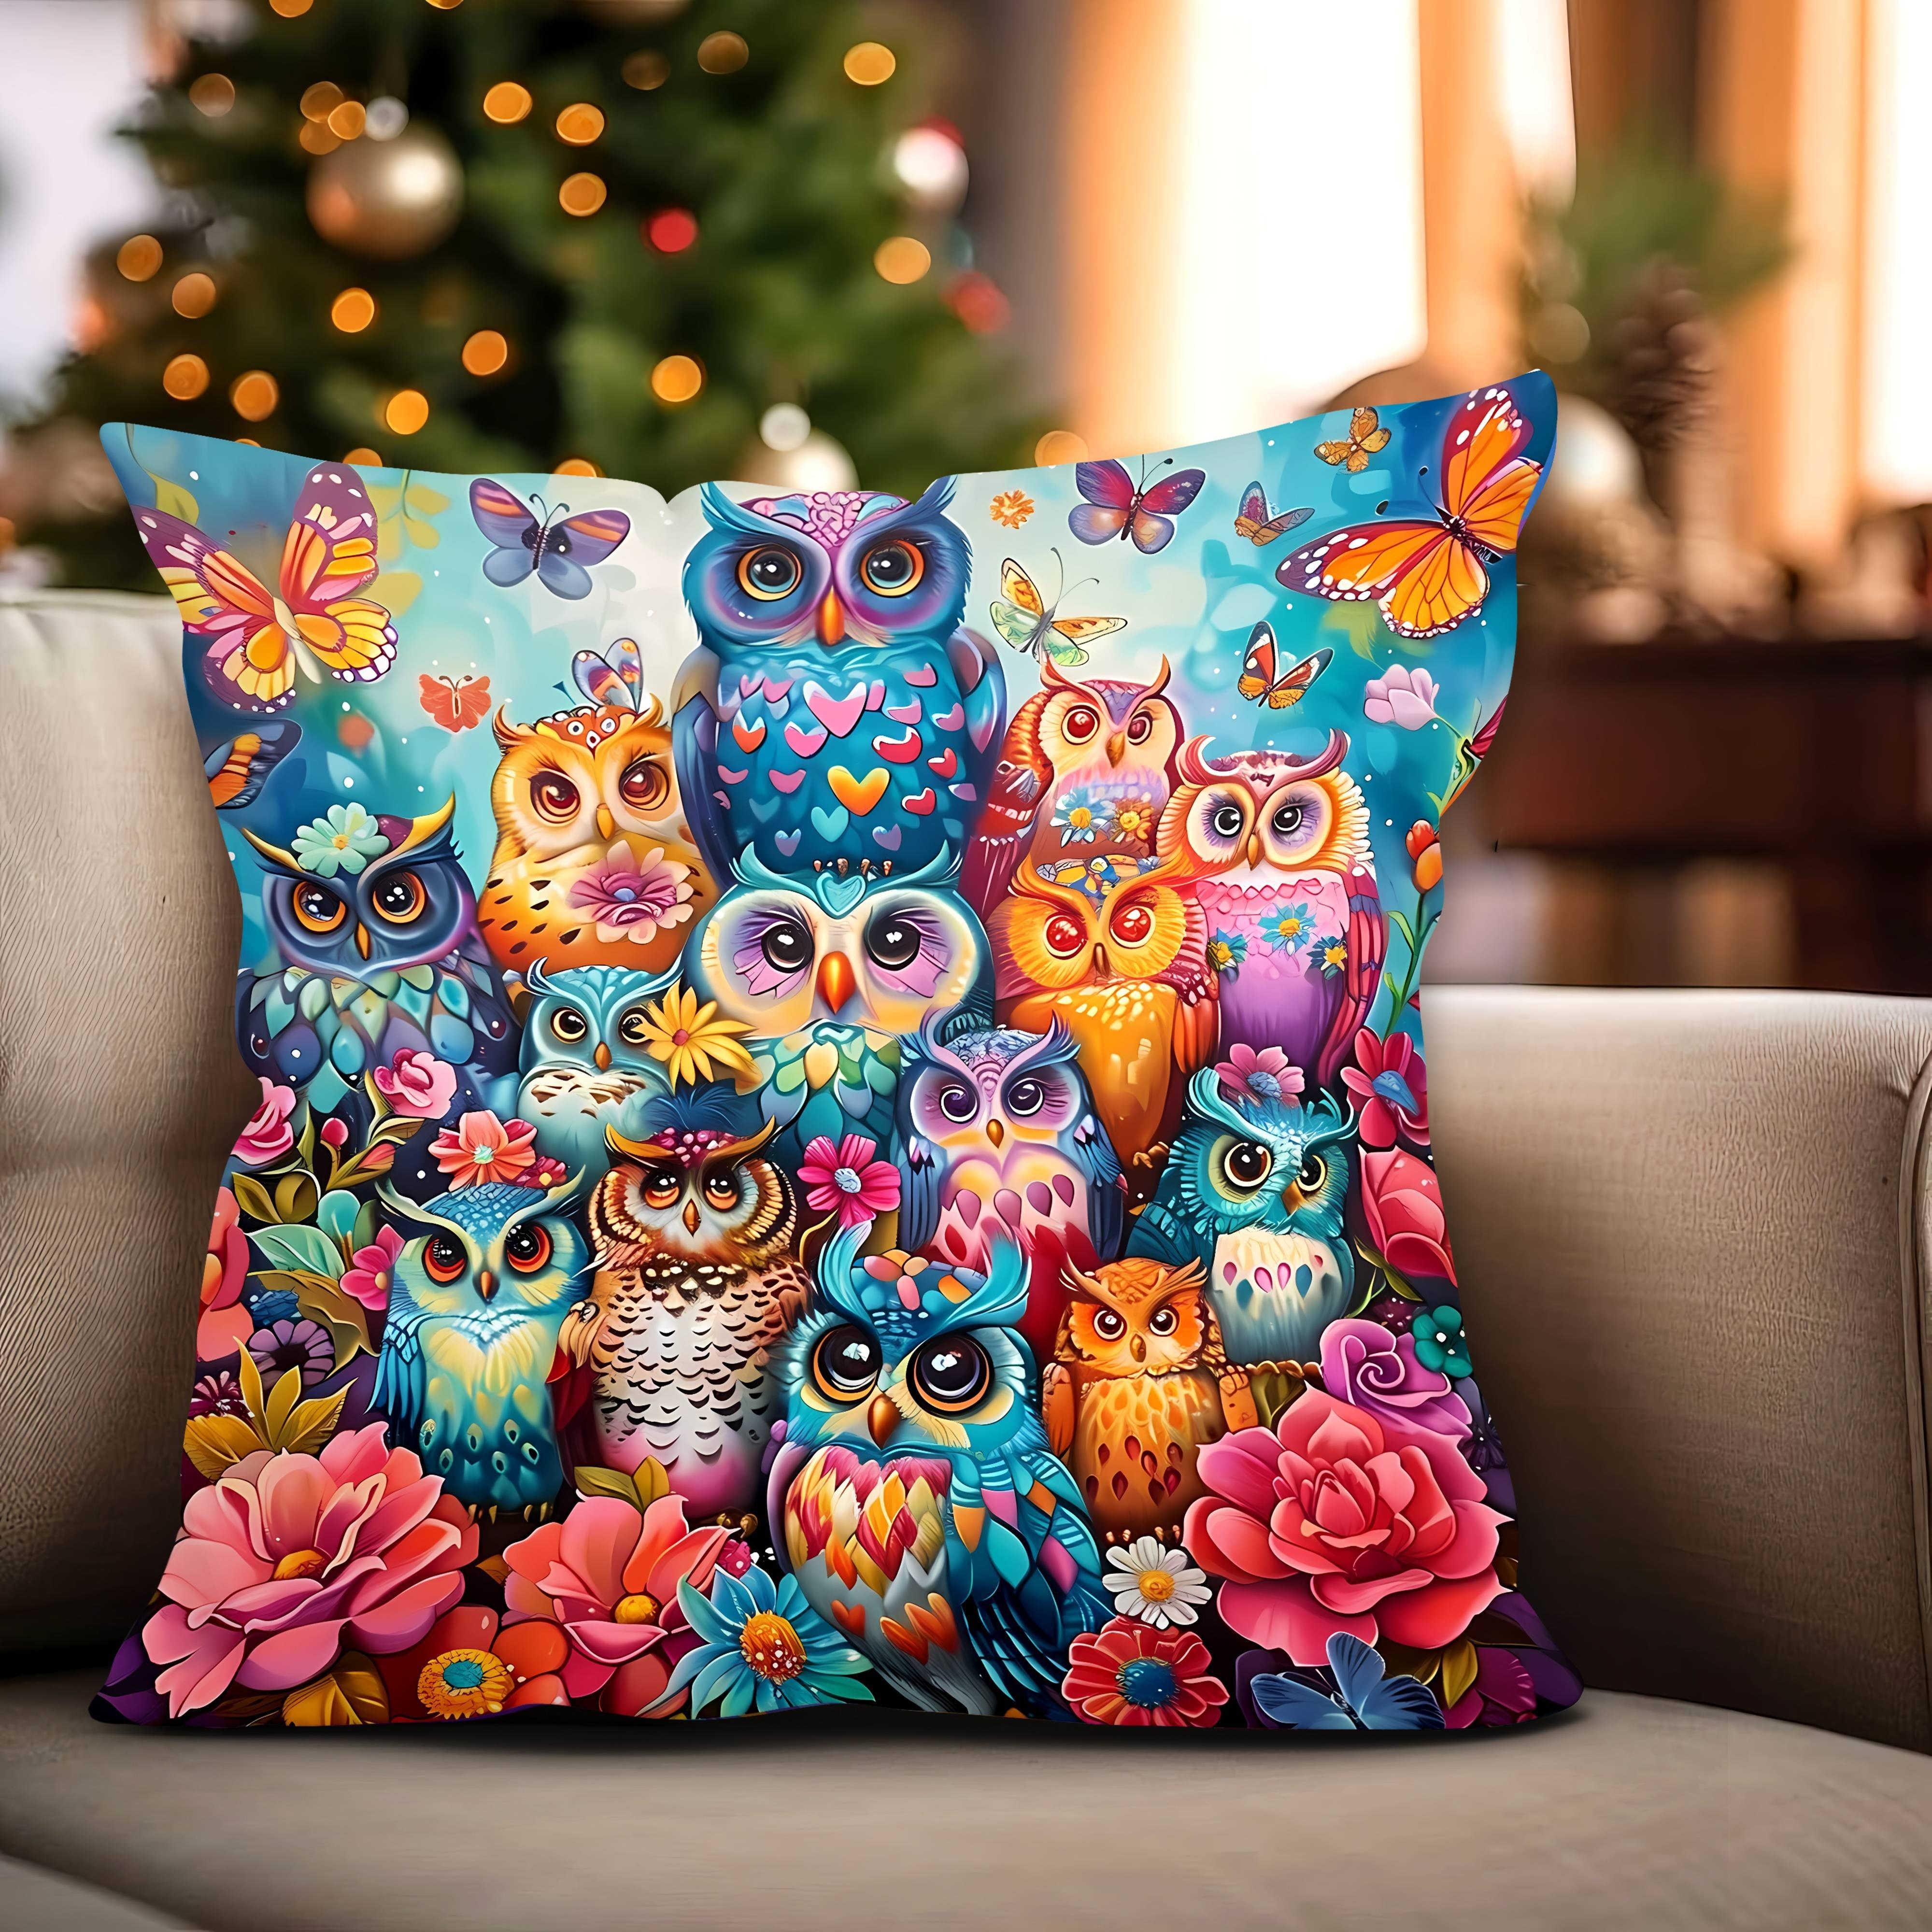 

Soft & Cozy Owl Pattern Throw Pillow Cover 17.7"x17.7" - Zippered, Machine Washable For Home, Office, And Car Decor